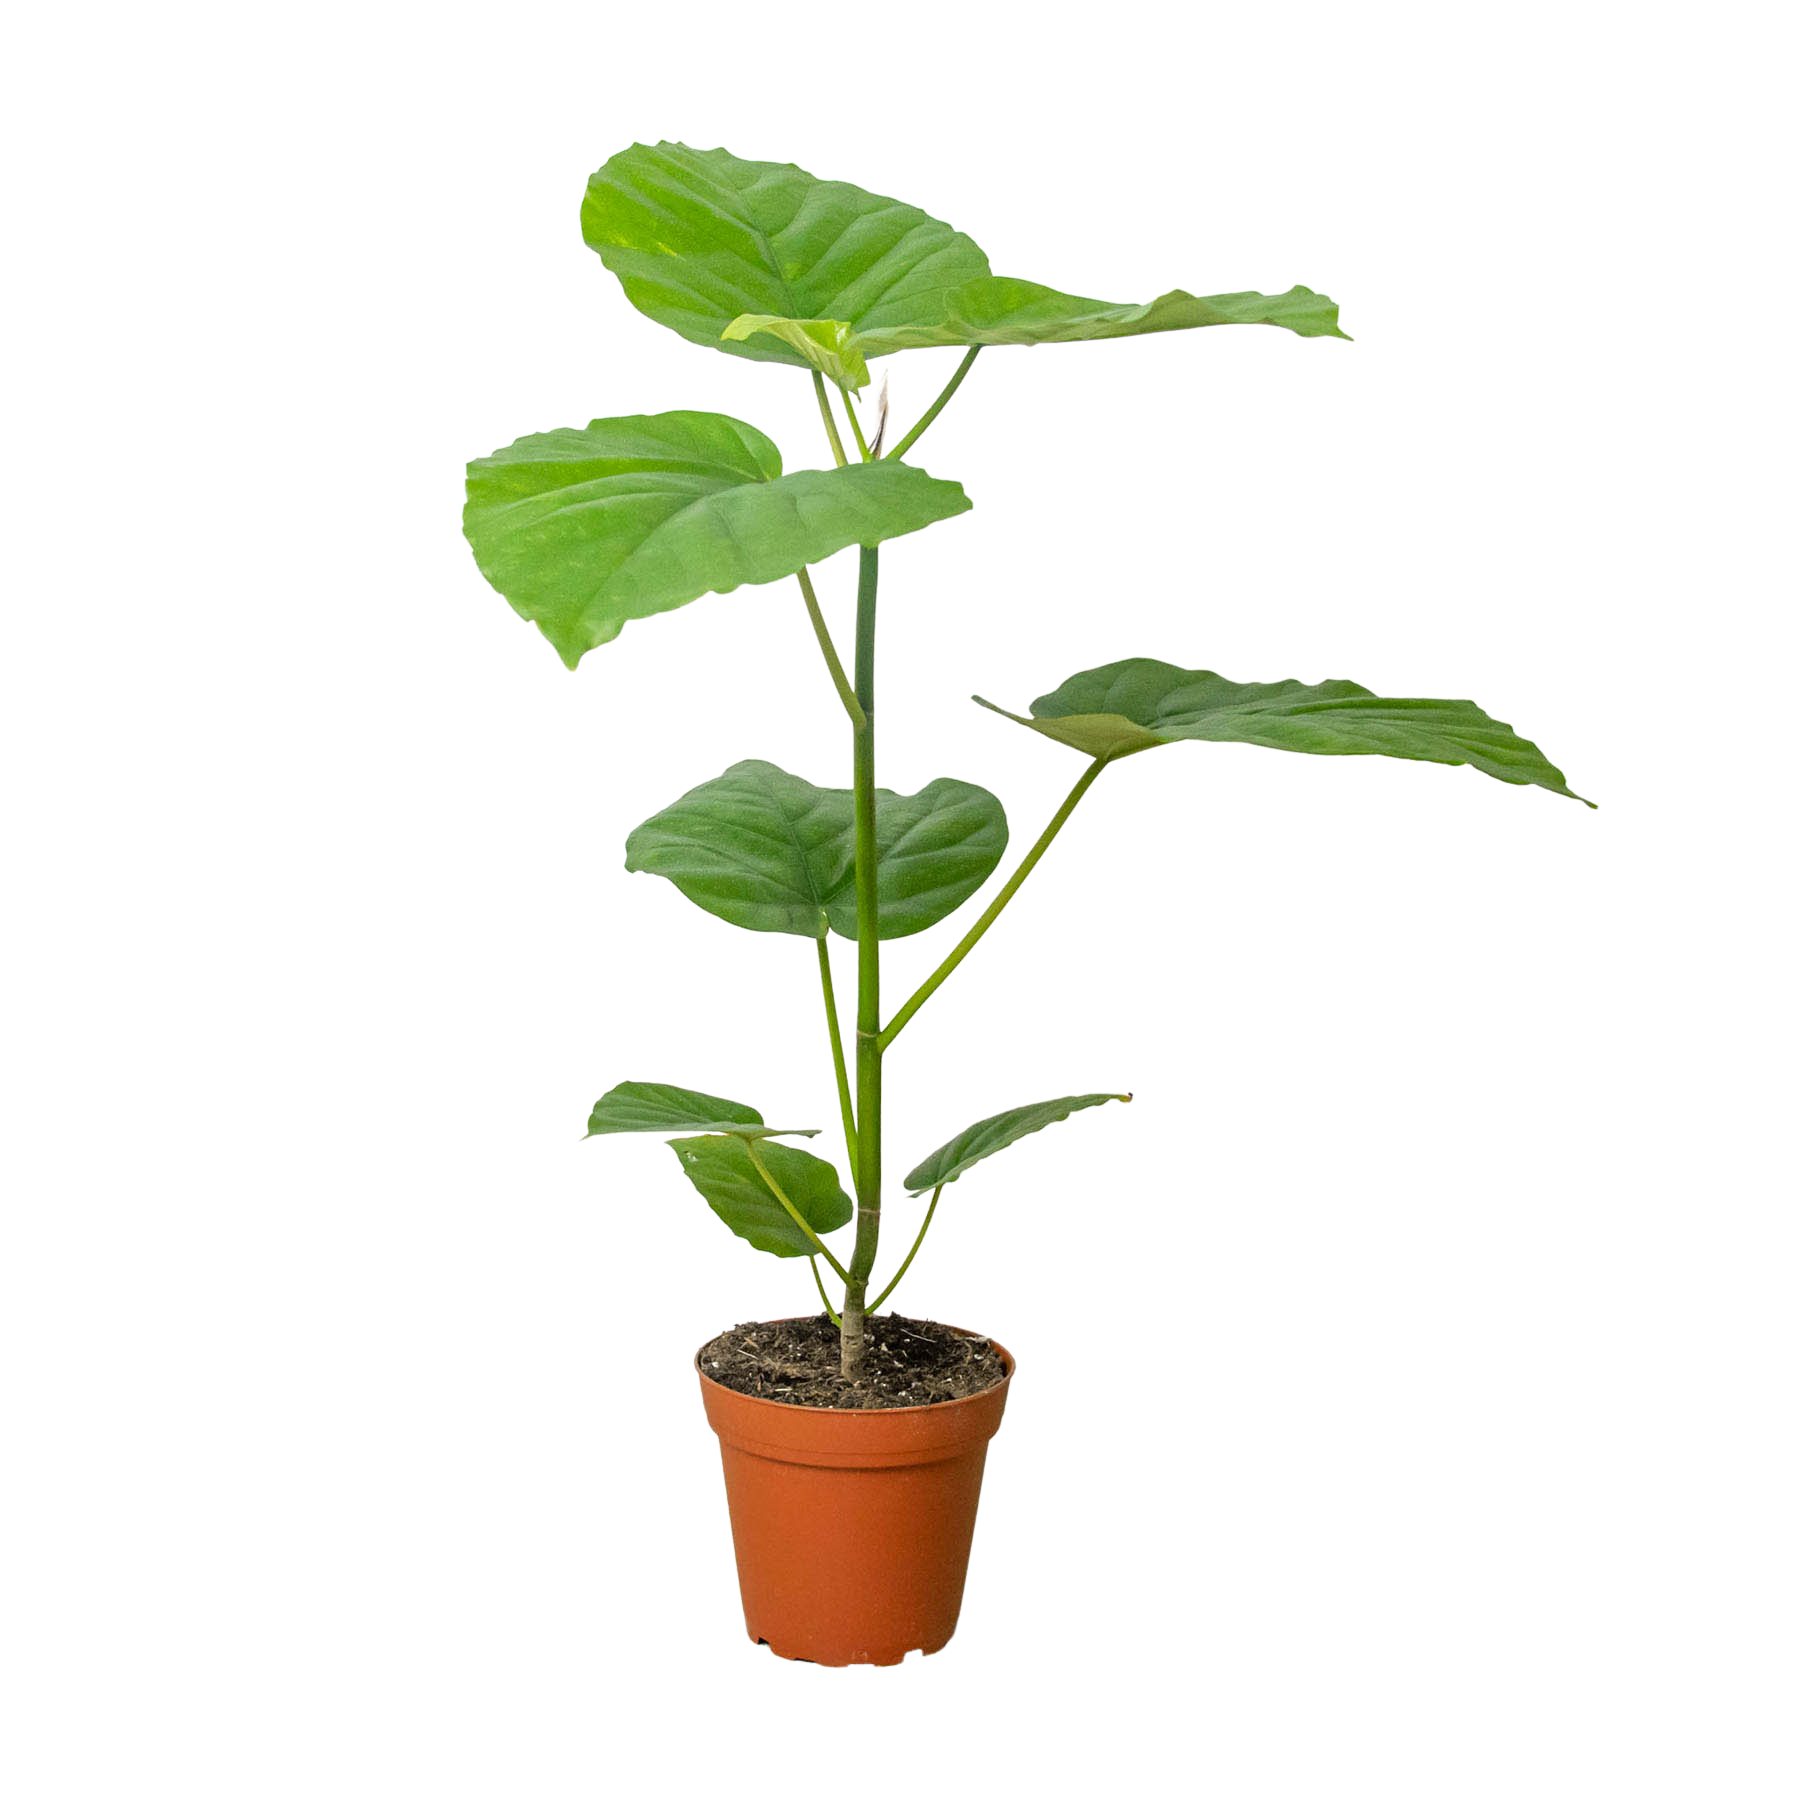 A small plant in a pot on a white background available at the best nursery near me.